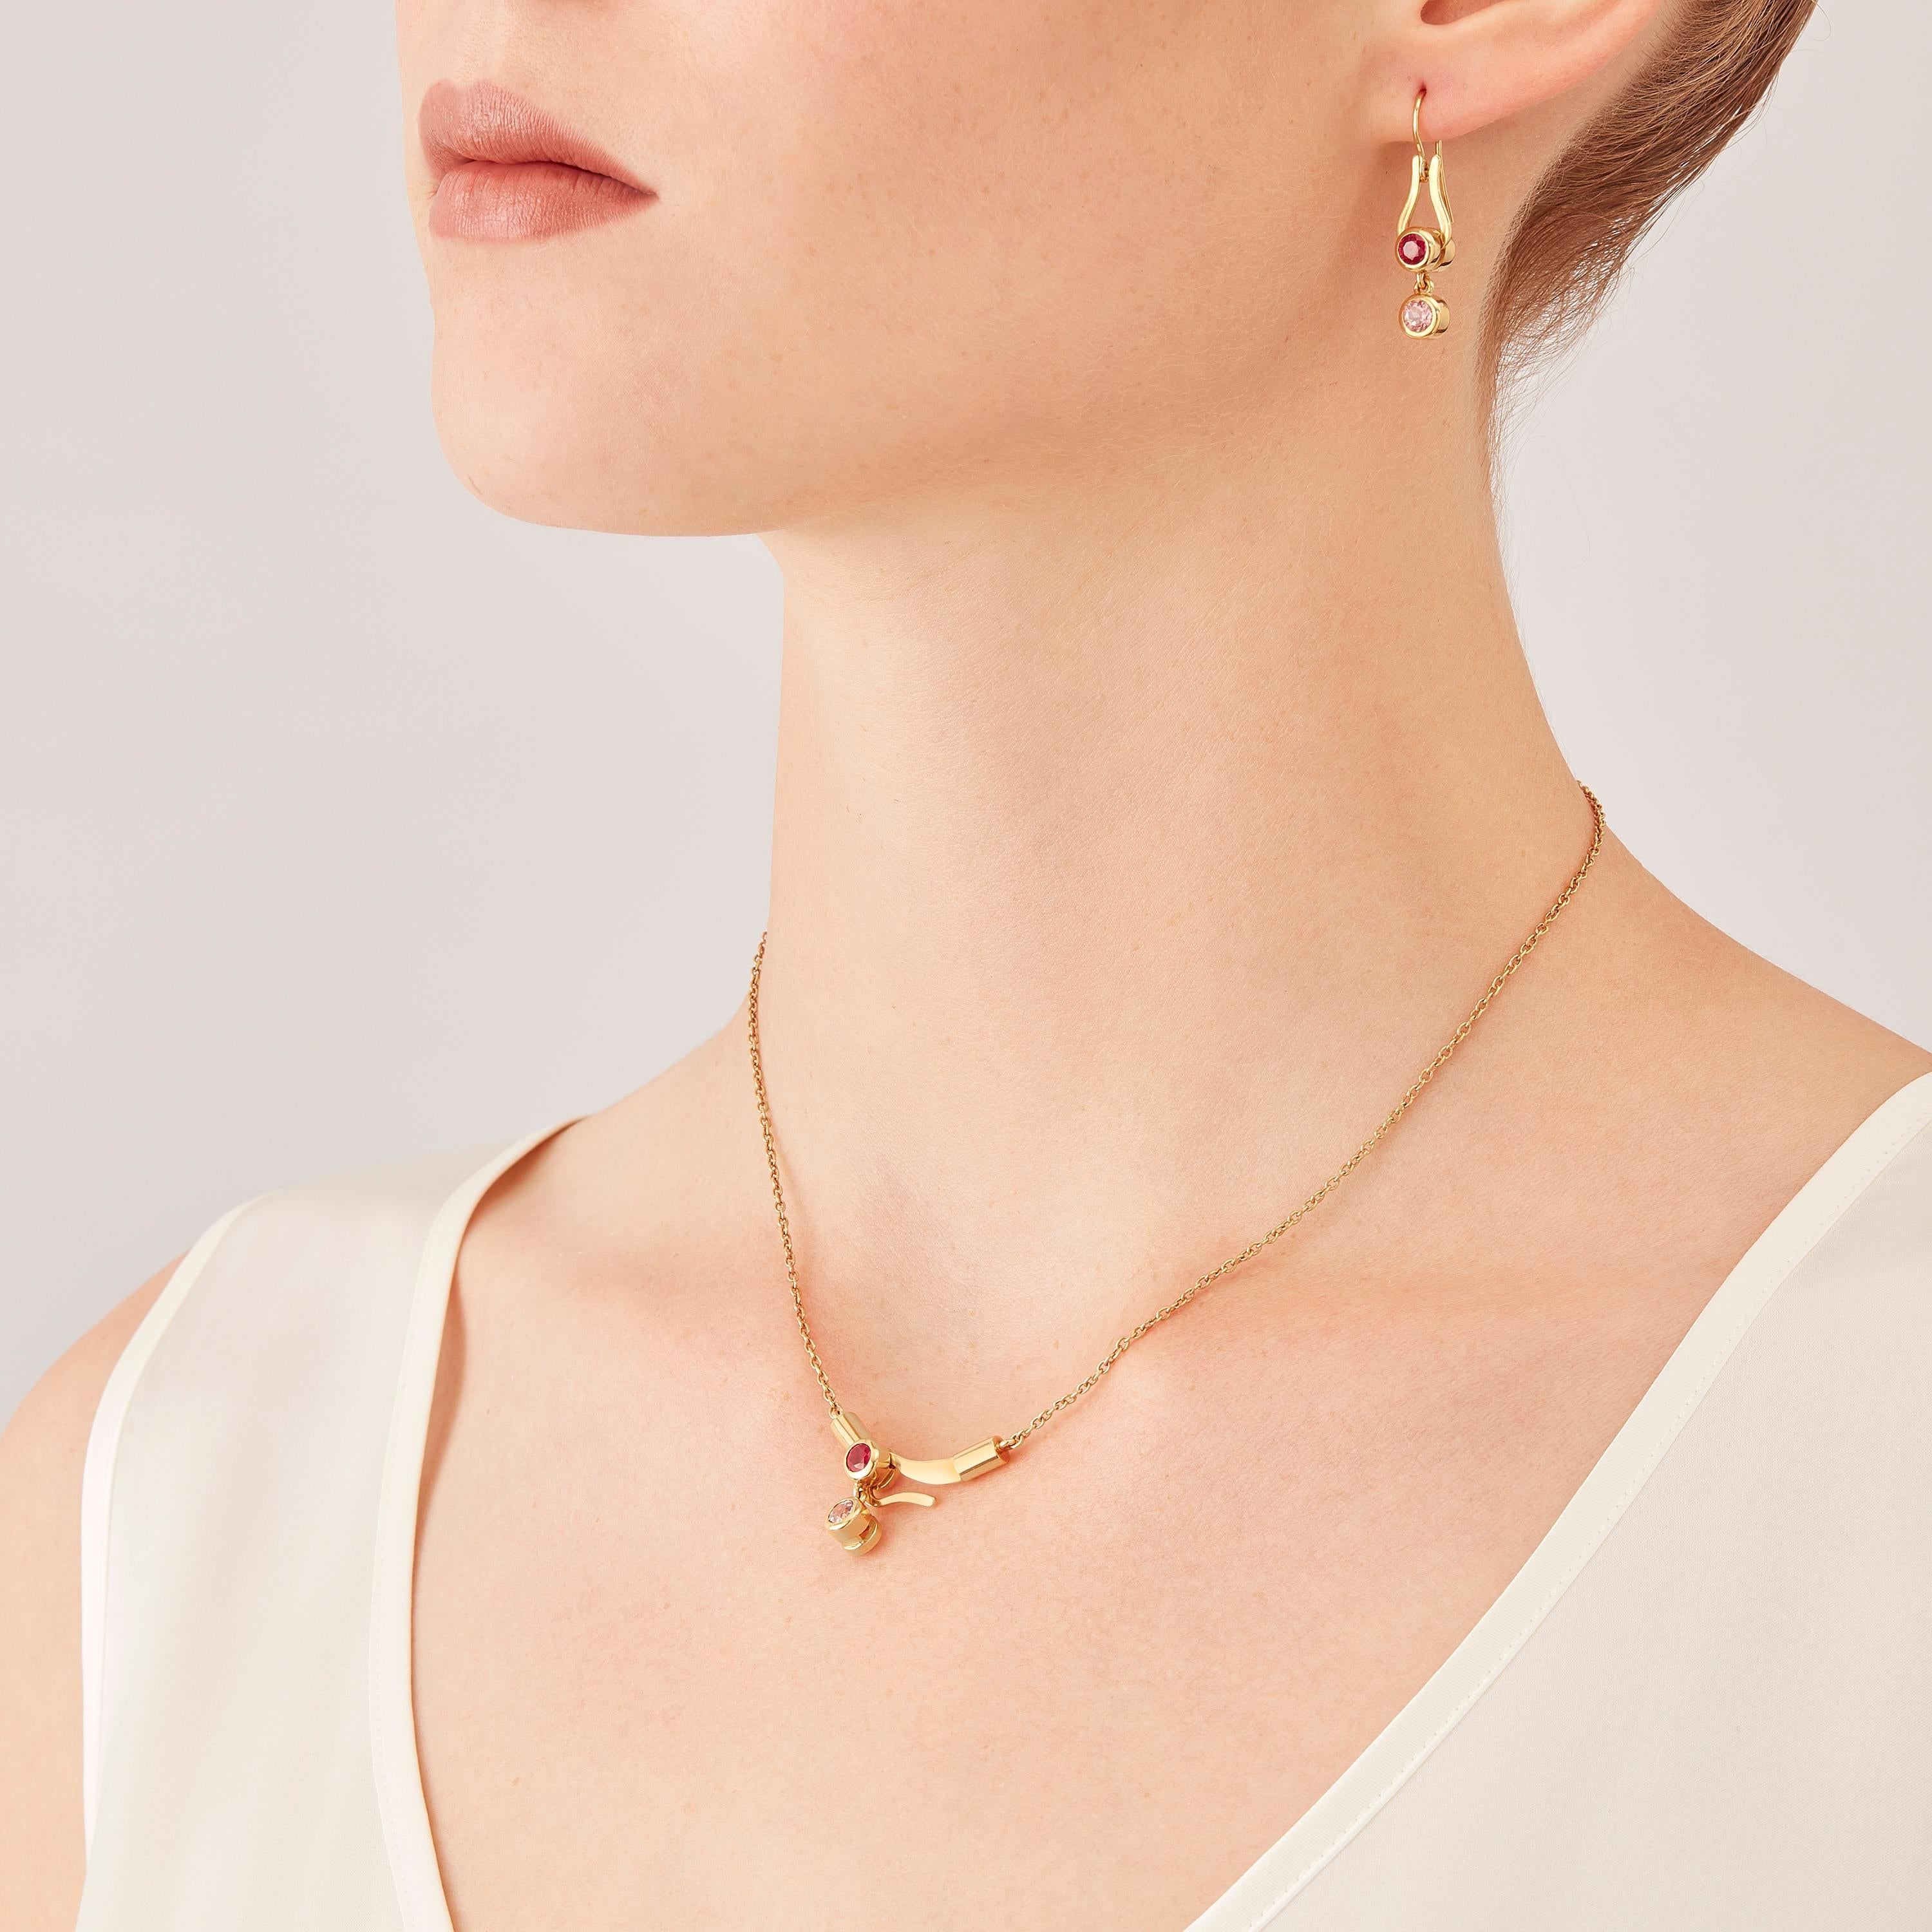 Made by hand in Nathalie Jean's Milan atelier, Microcosmos Pendant in 18 karat rosé gold, a warm, sophisticated color close to yellow gold, is devised as a game, a construction or a sophisticated aerial mobile. Shapes attached to gold settings drop